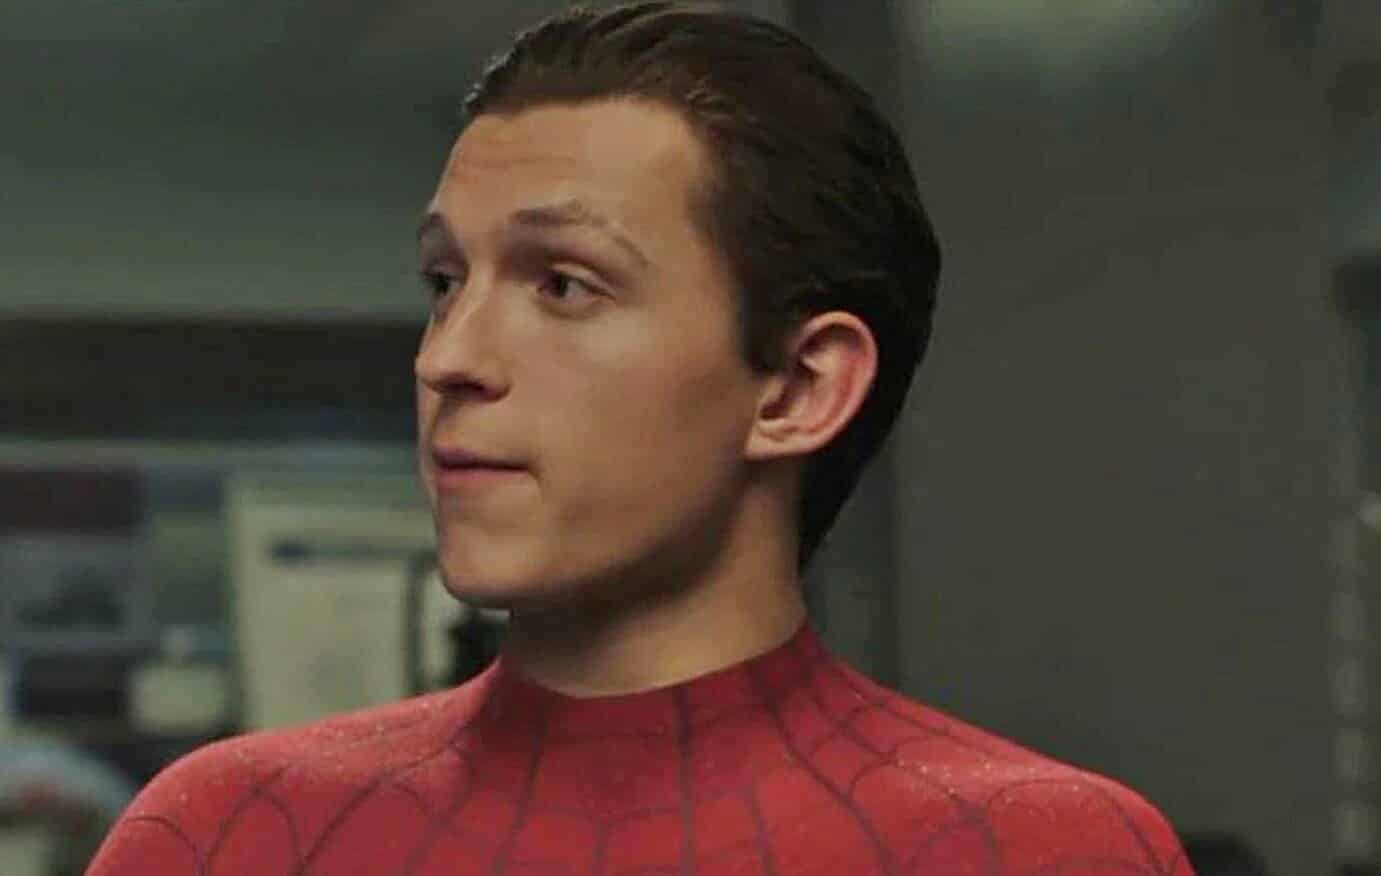 Spider-Man: Far From Home MCU